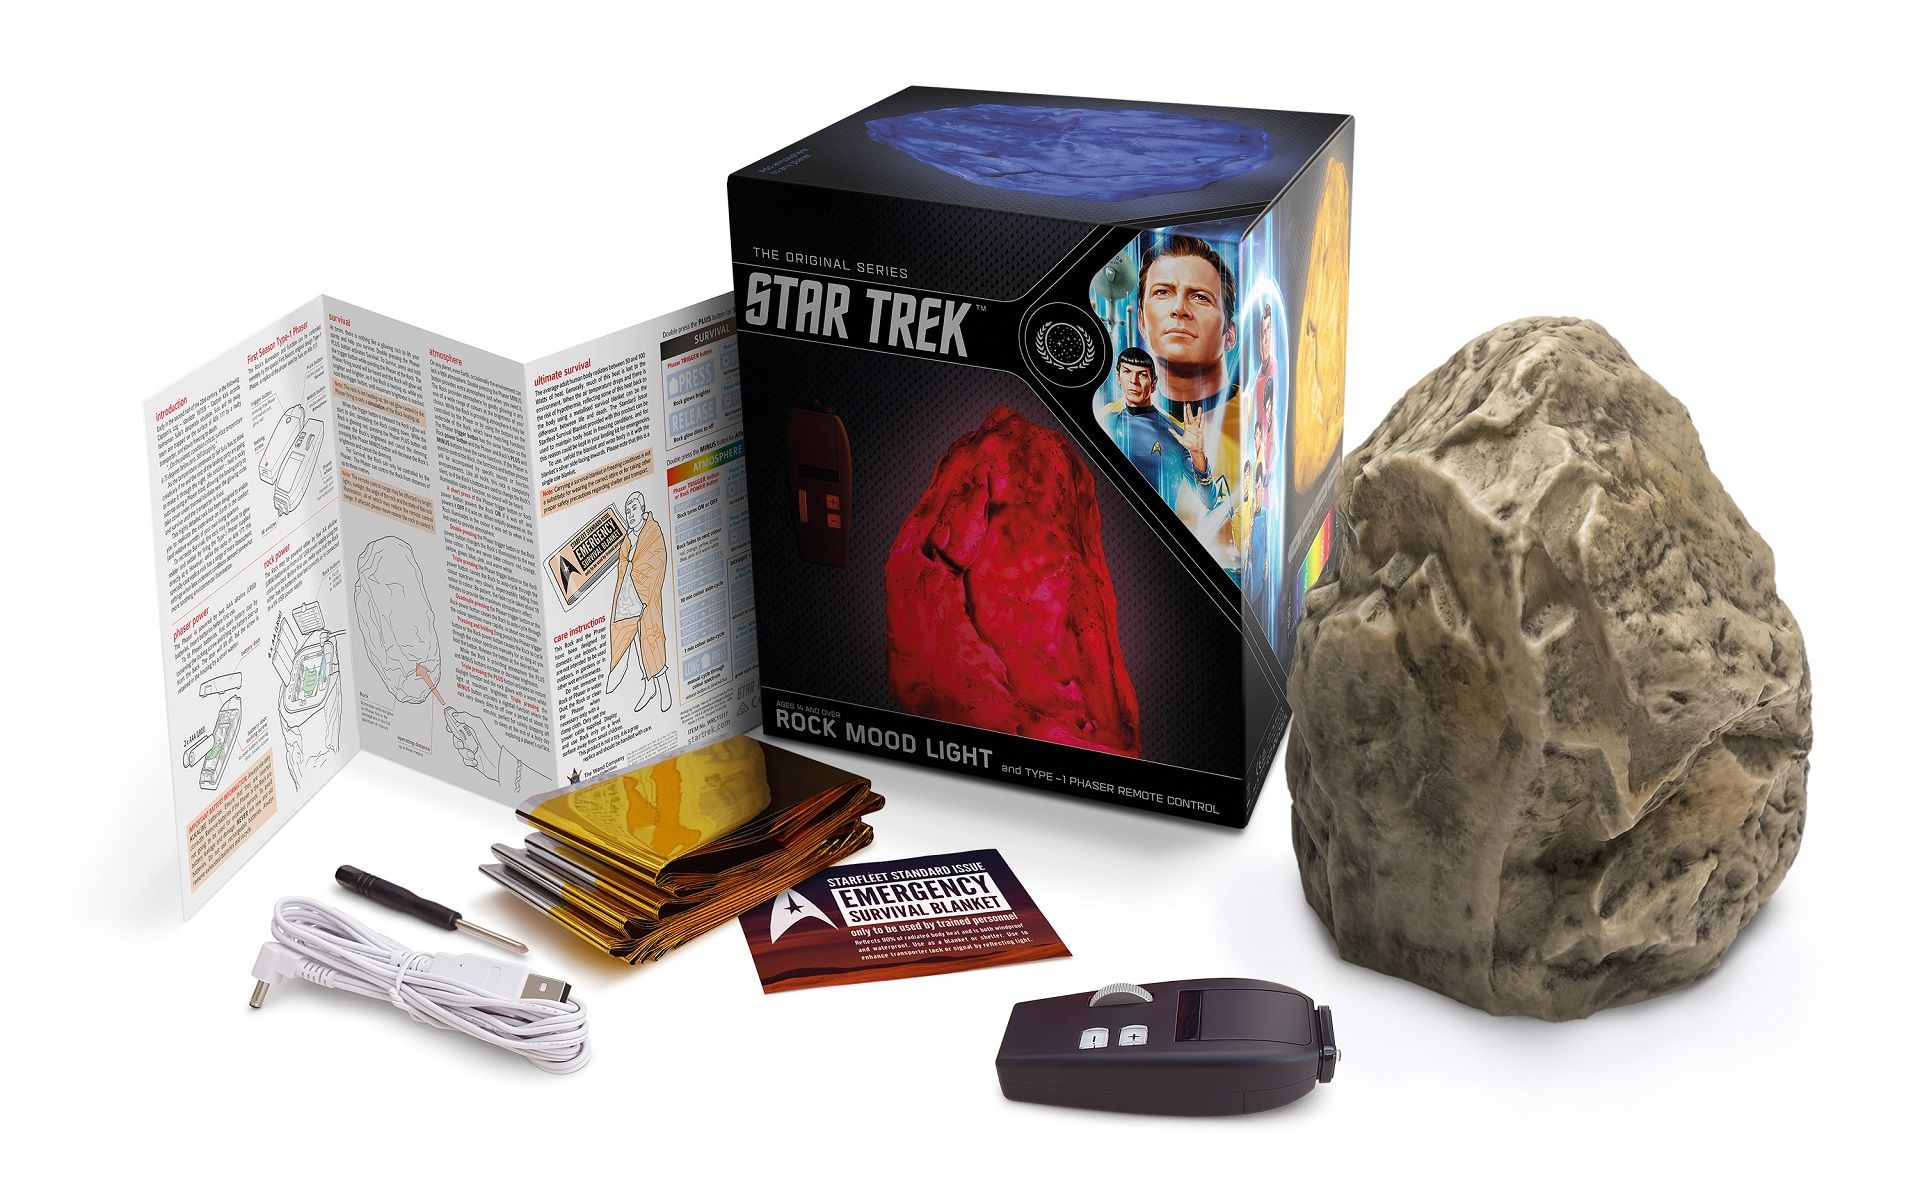 Star Trek In Real Life Best Starfleet Gadgets And Toys You Can Buy image 25